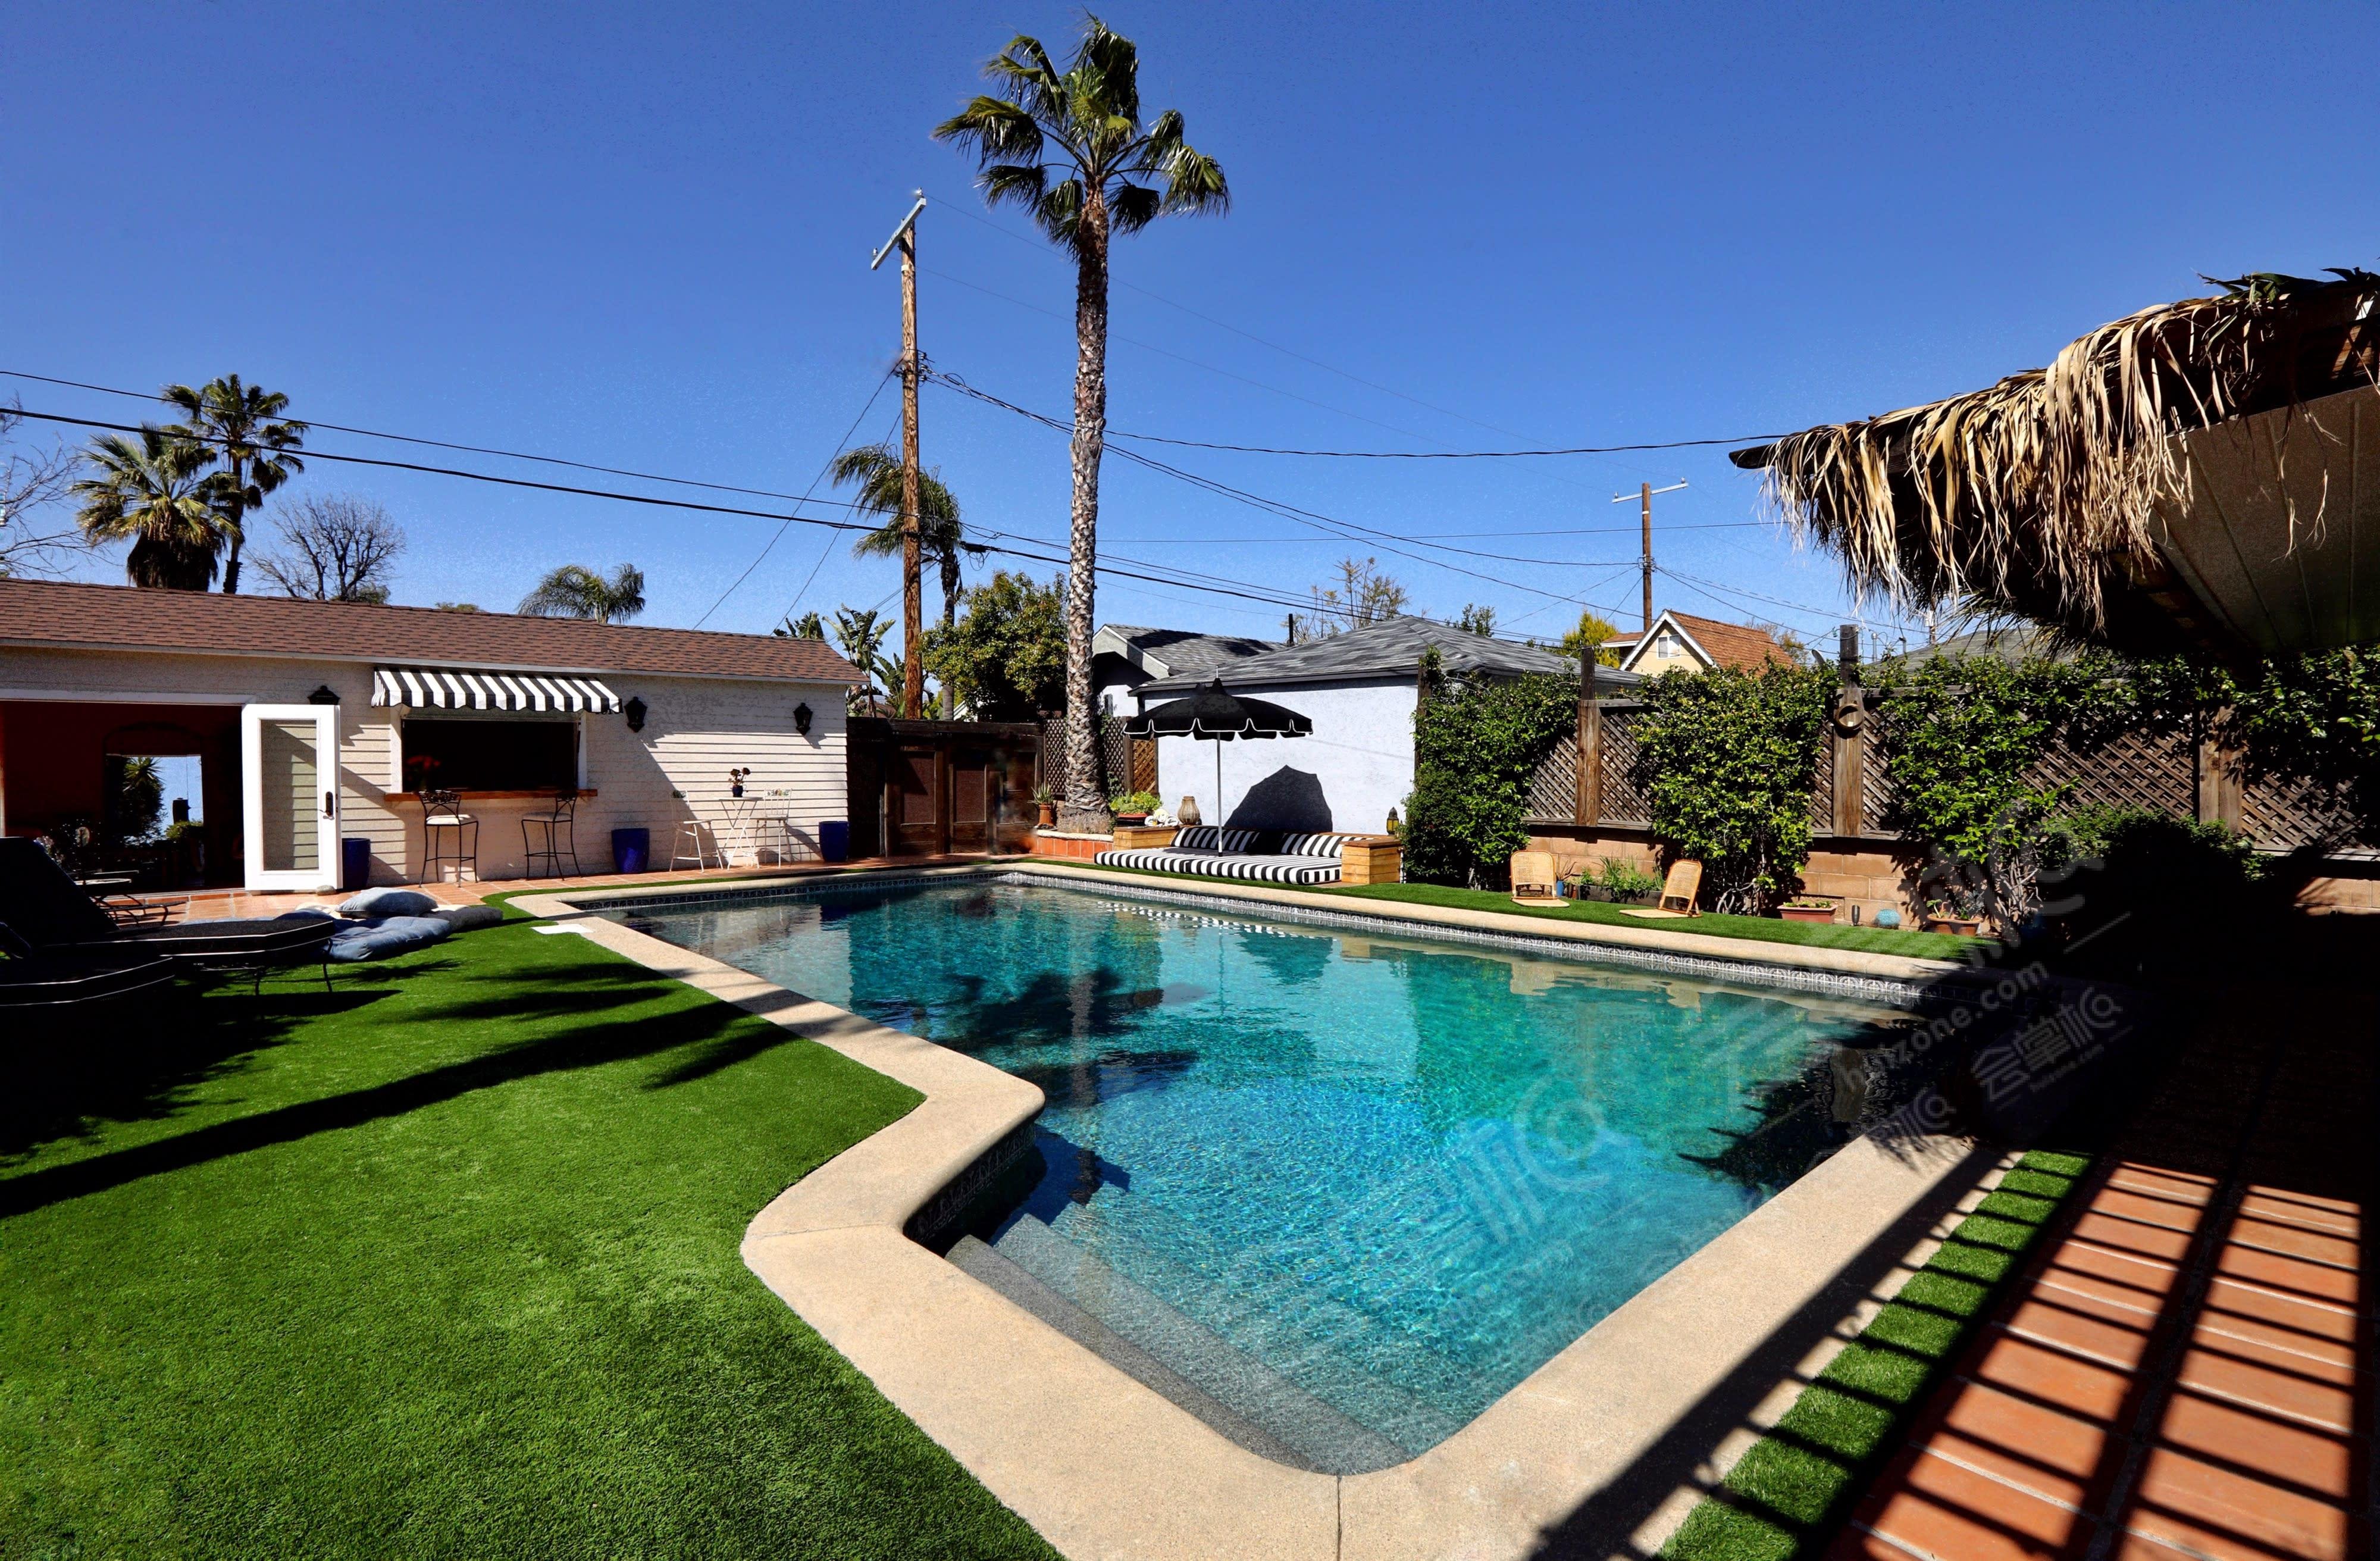 Jungalow Oasis Home w/ Large Private Pool & Casita! ** DISCOUNTED PRICE THROUGH JUNE!